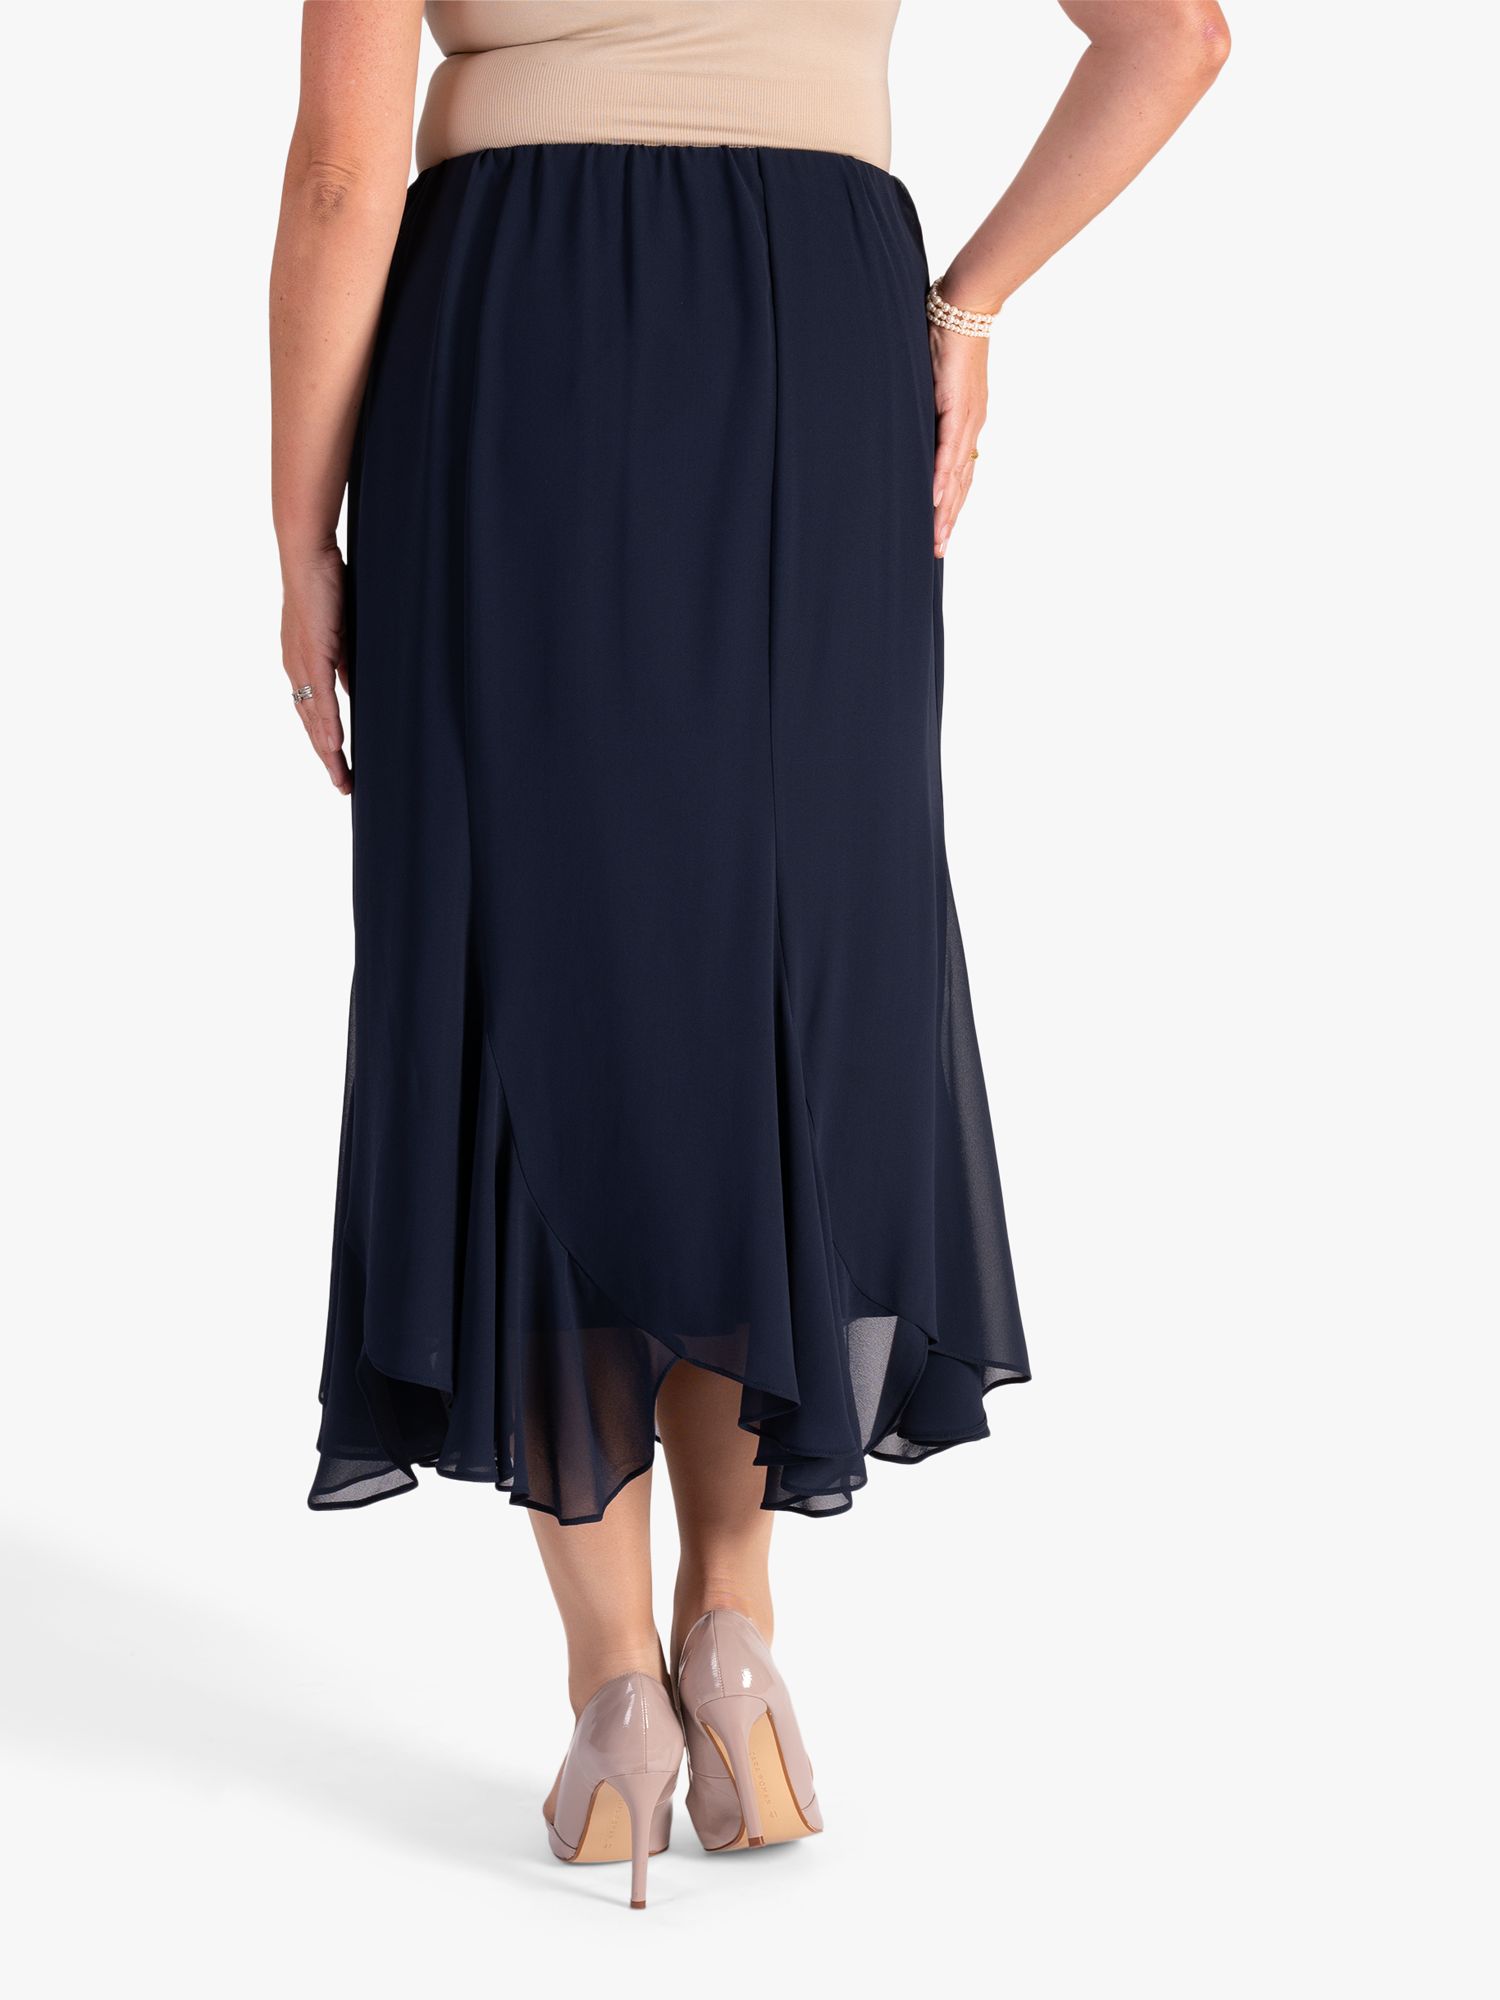 Buy chesca Chiffon Skirt Online at johnlewis.com